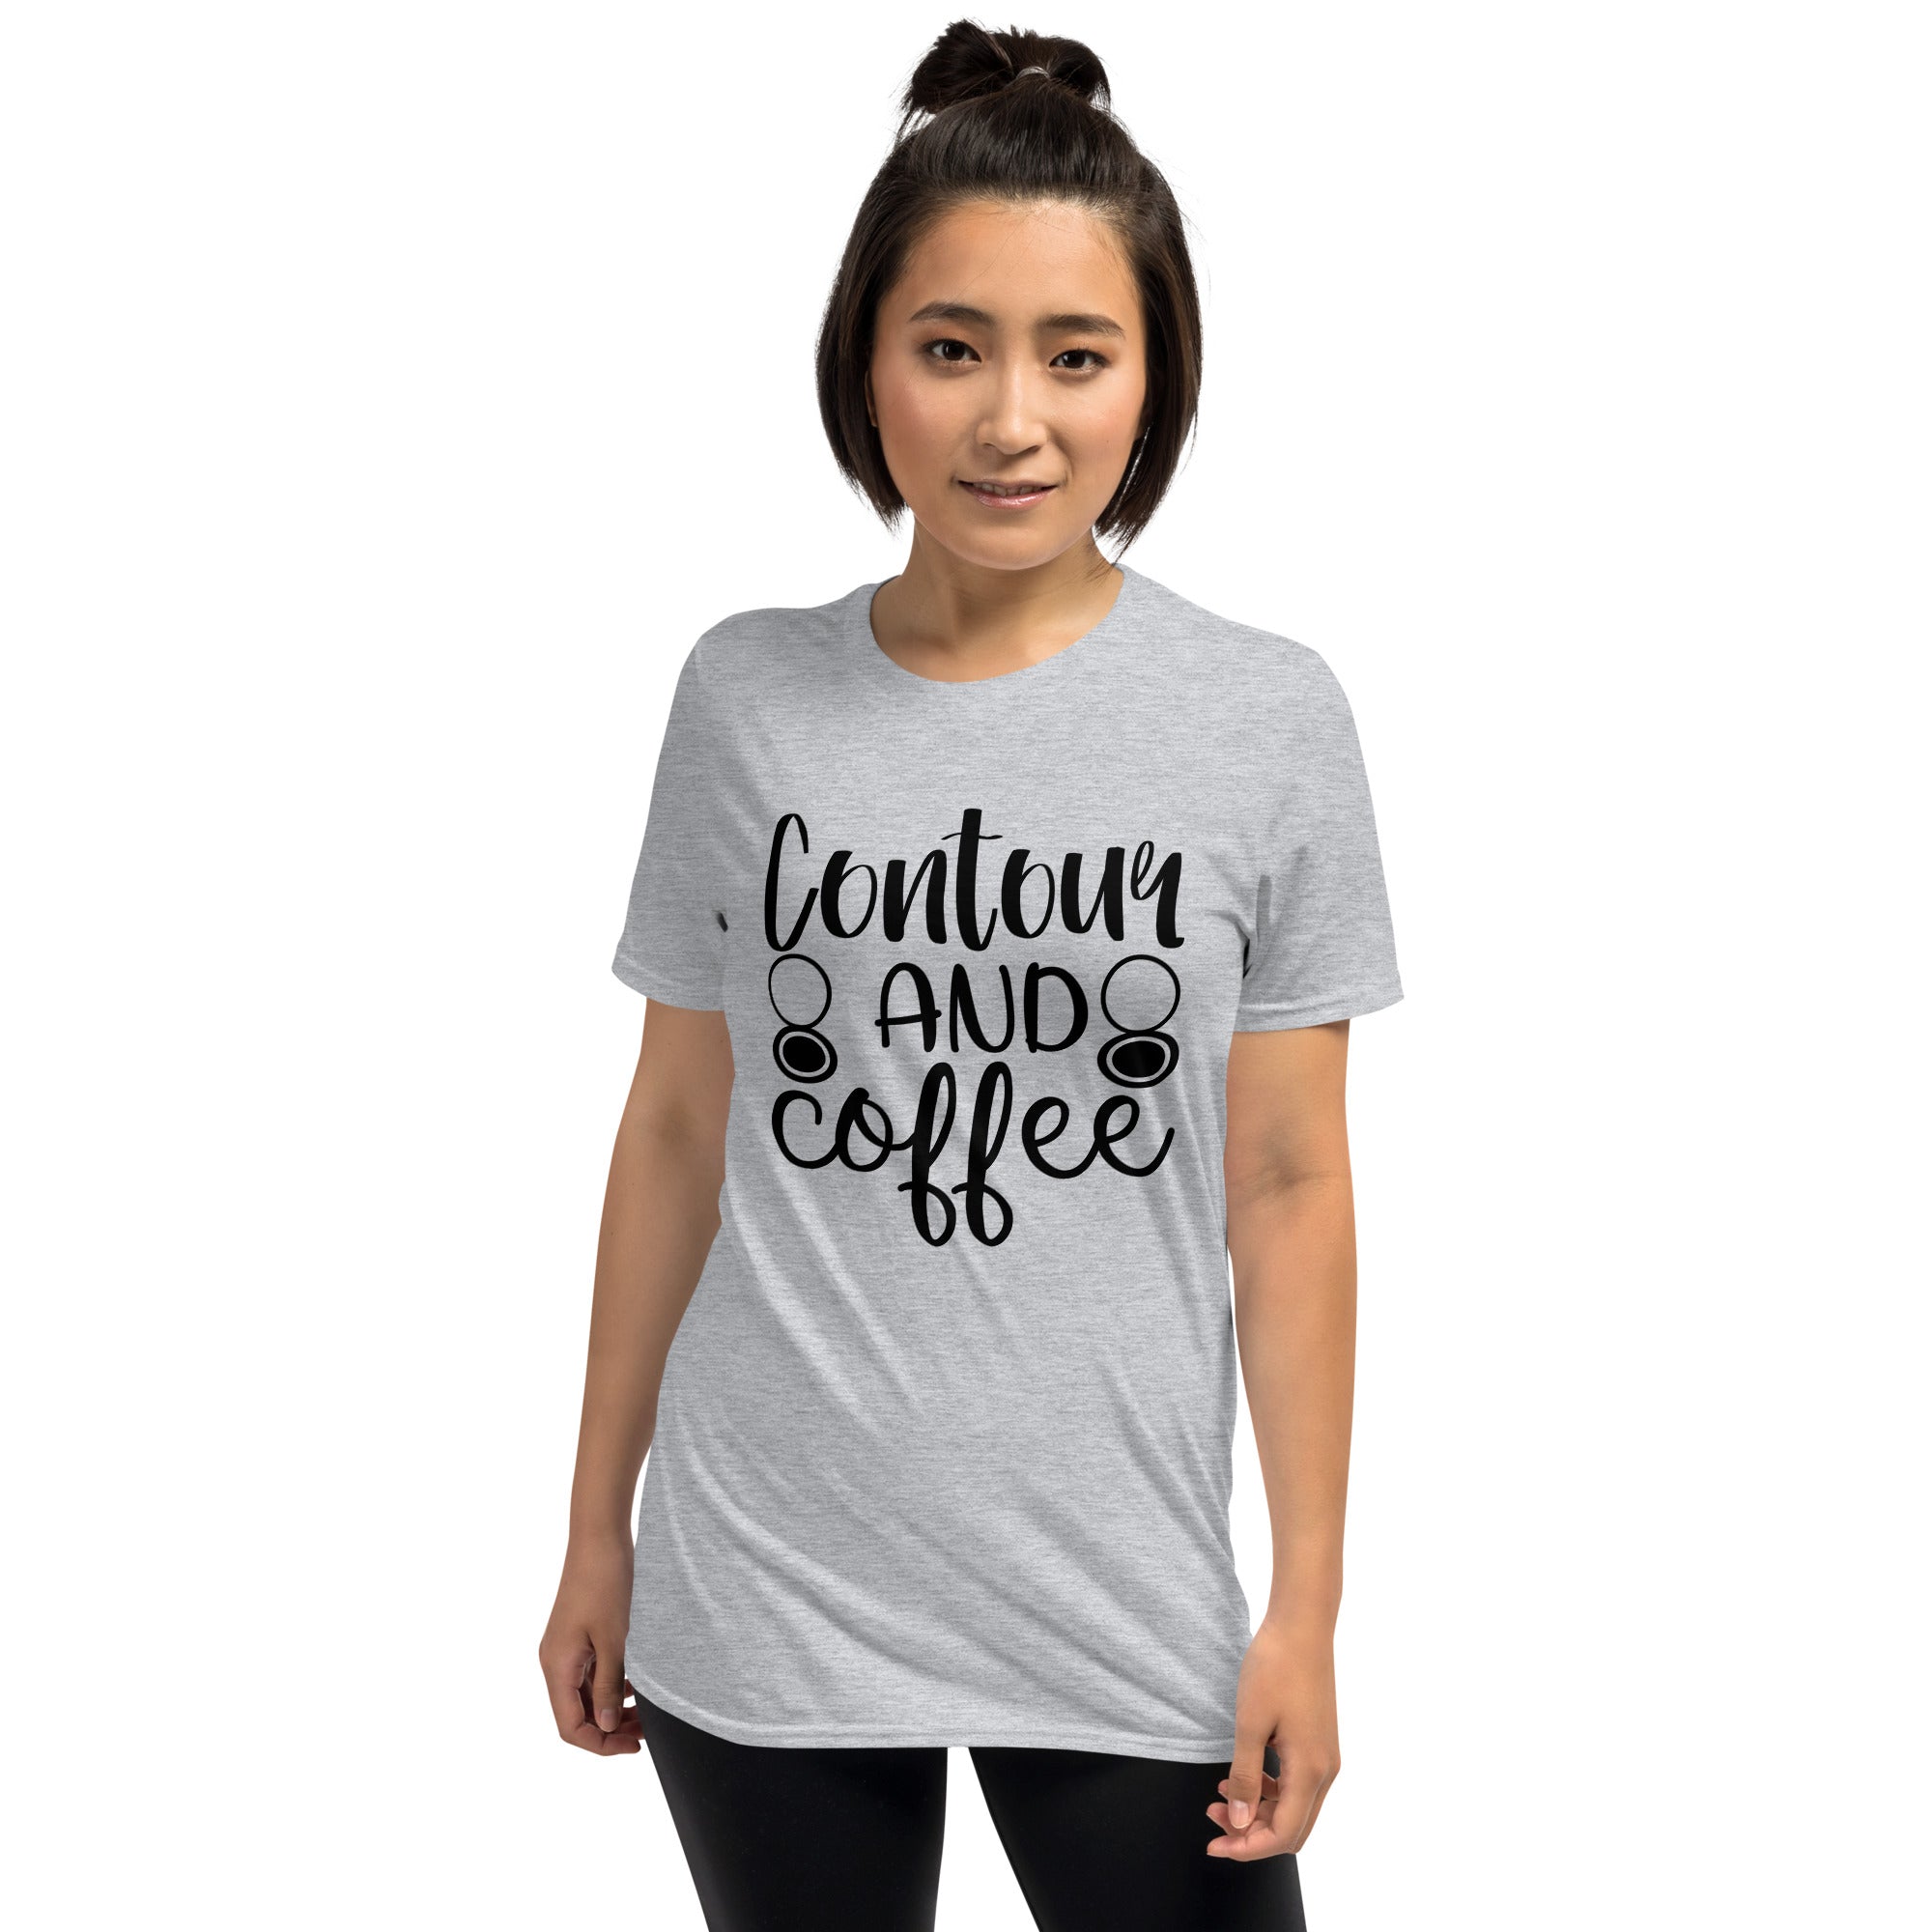 Contour and Coffee - Short-Sleeve Unisex T-Shirt